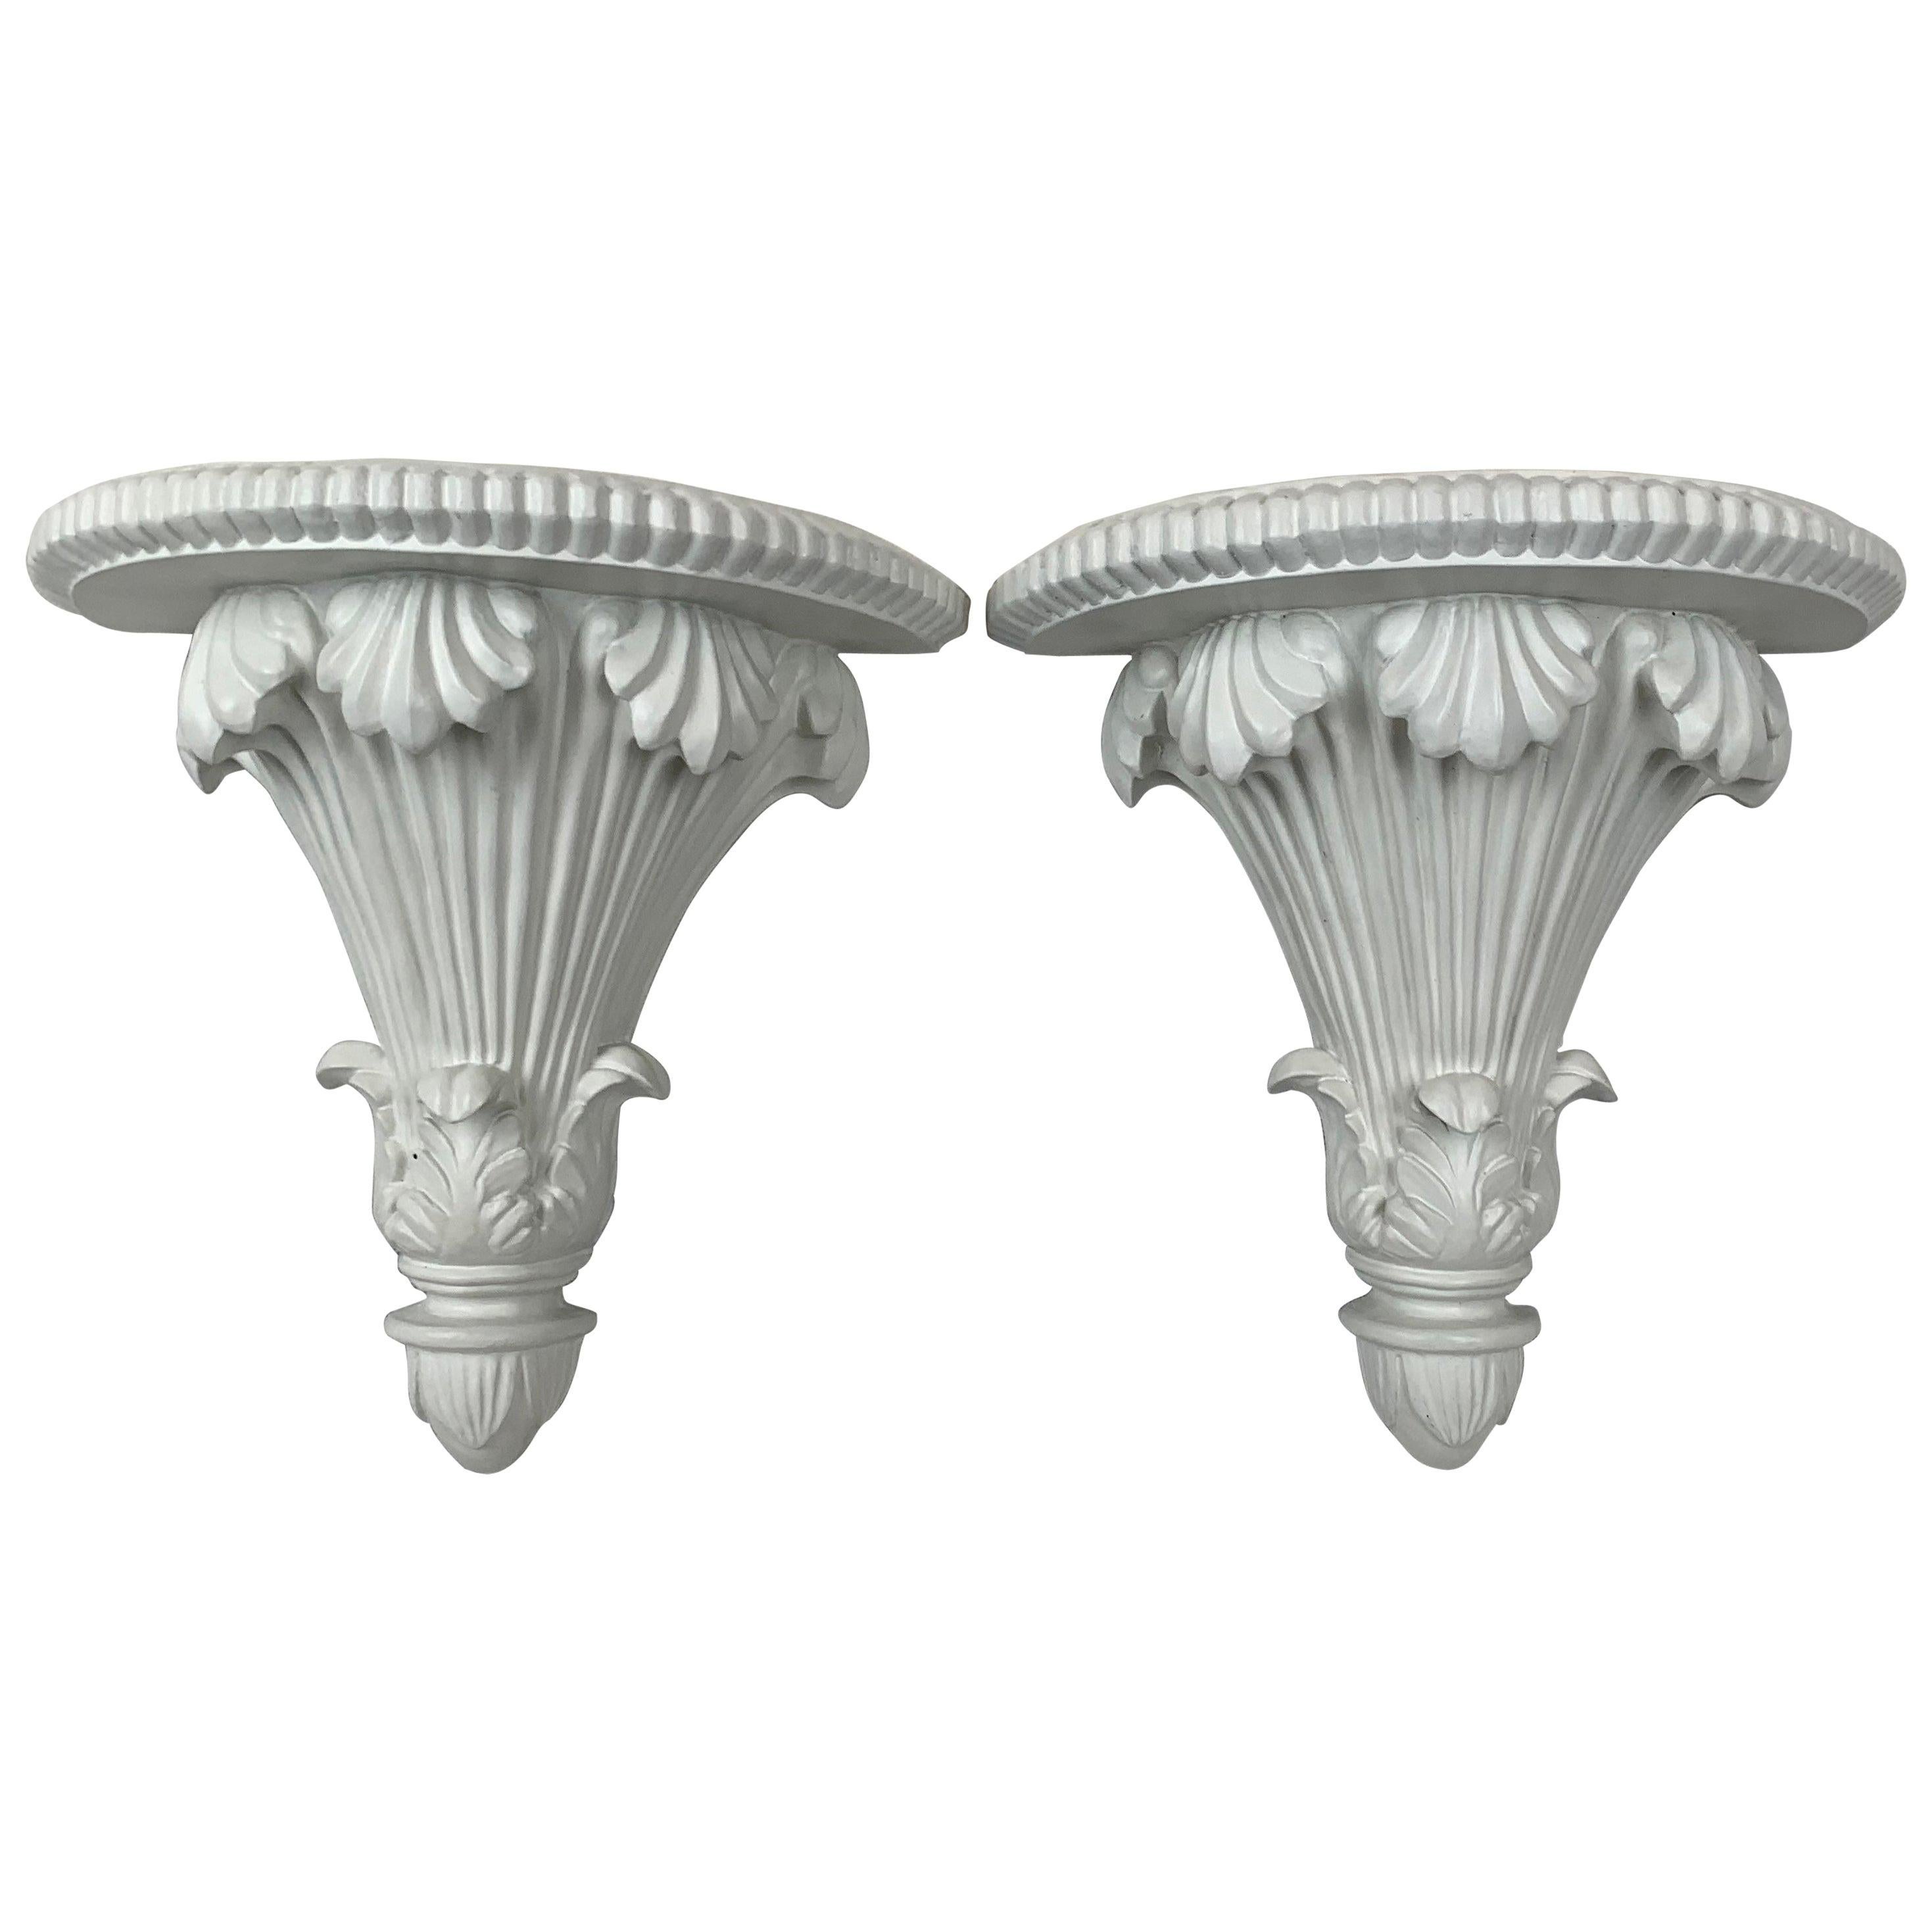 A Pair of Wall Brackets in White in a Neoclassical Style